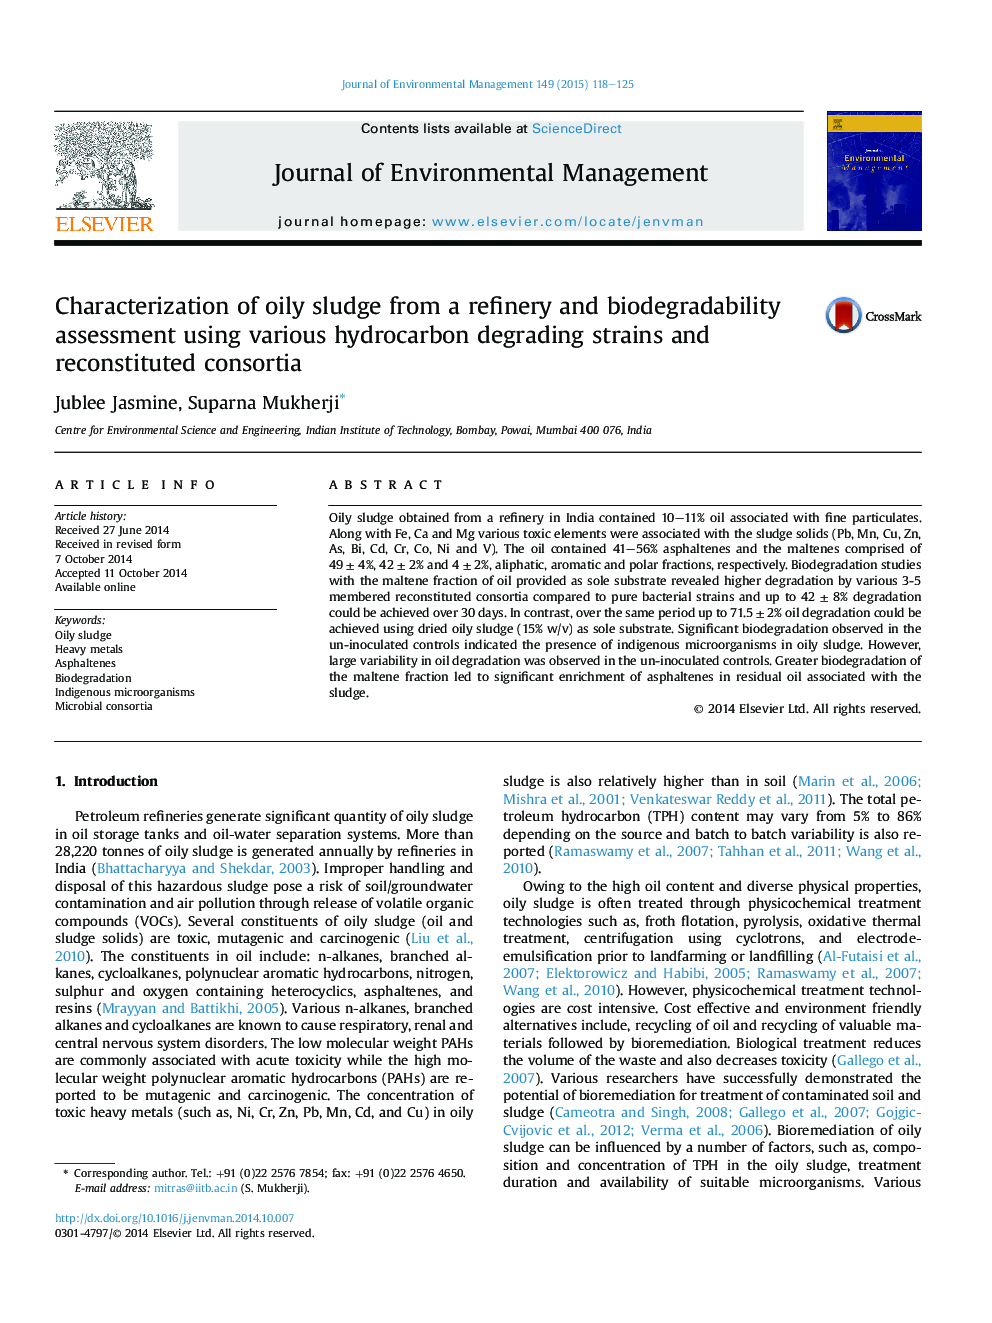 Characterization of oily sludge from a refinery and biodegradability assessment using various hydrocarbon degrading strains and reconstituted consortia